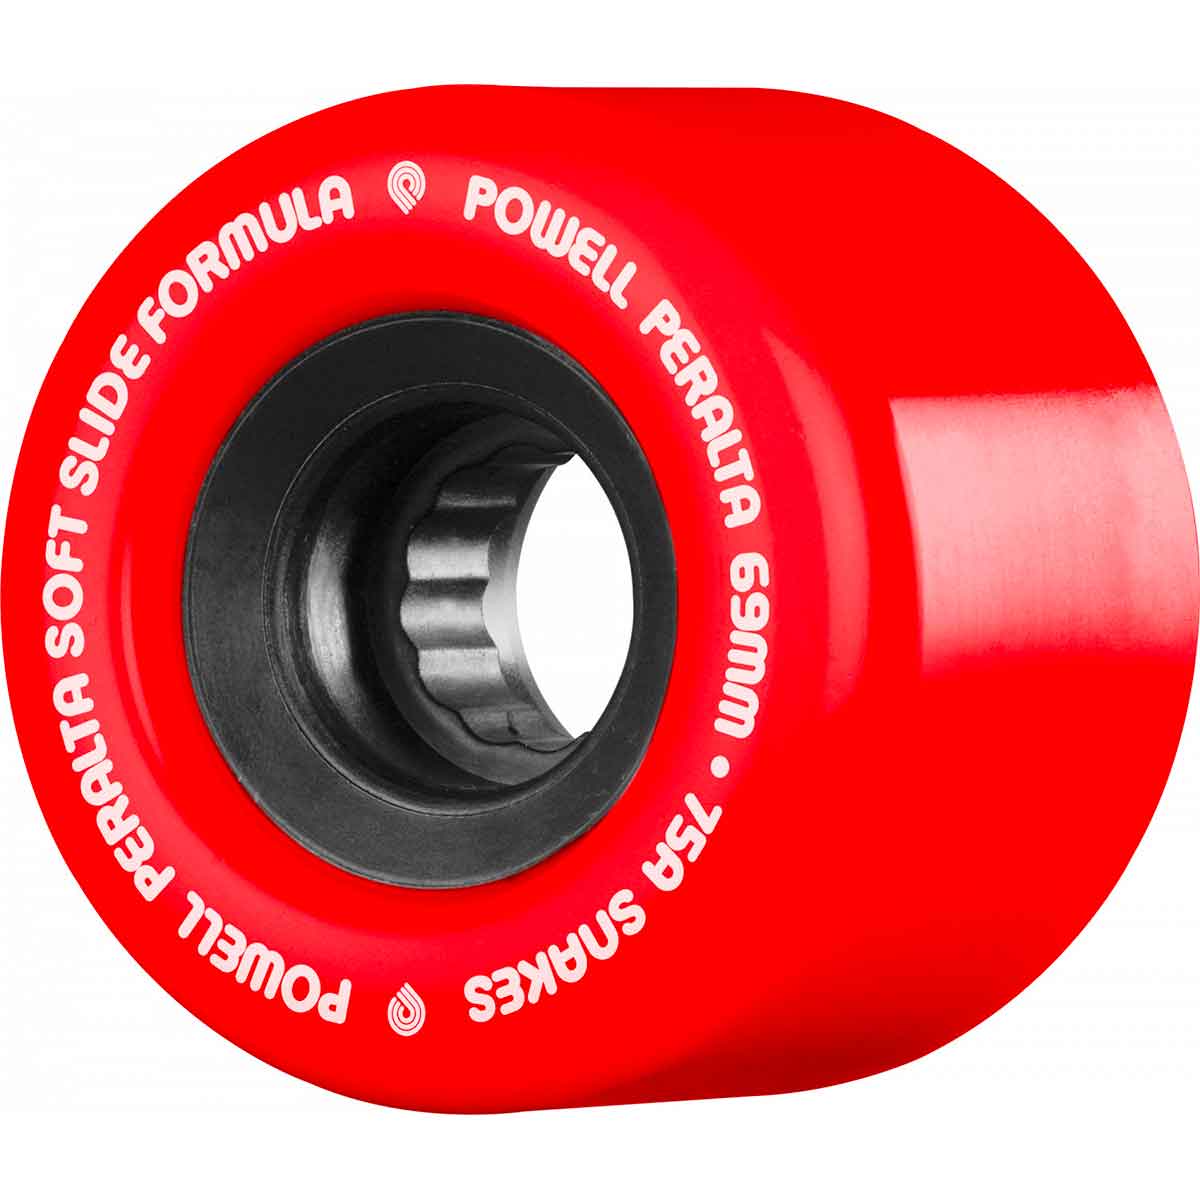 Powell Peralta 54mm Mcgill Snake Skateboard Wheels With Independent Bearings